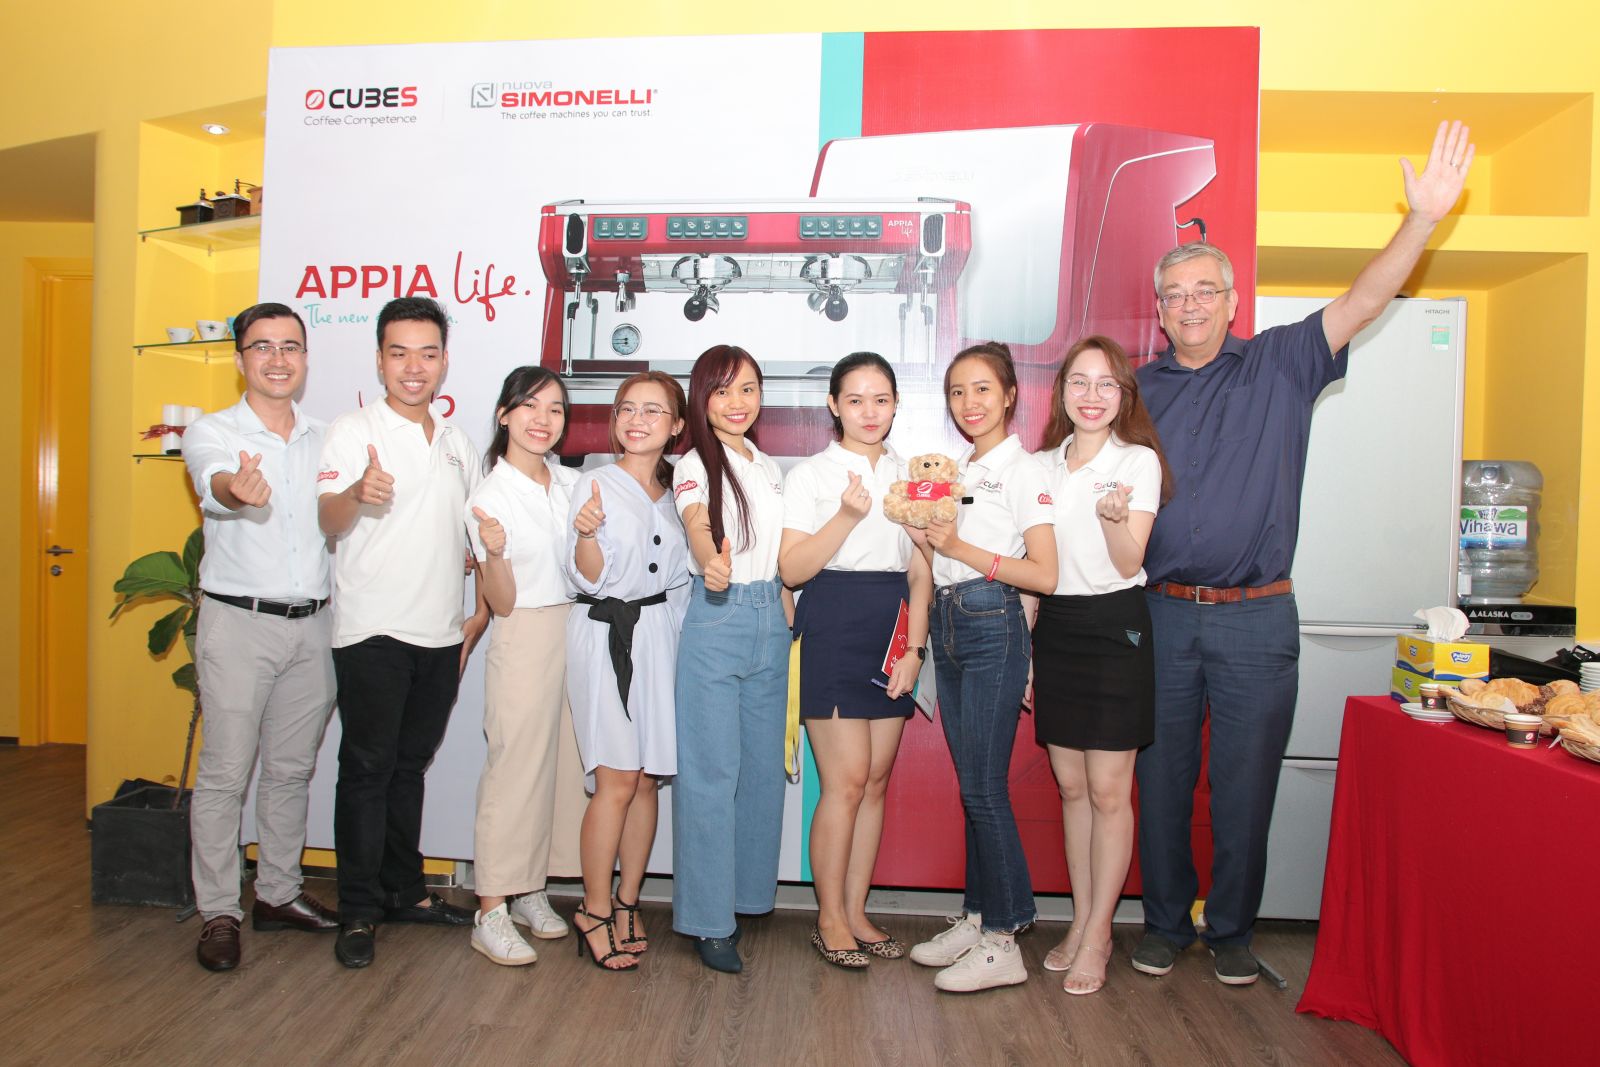 OPENING EVENT NEW WINNER OF COFFEE VILLAGE : APPIA LIFE 2 GROUPS VOLUMETRIC